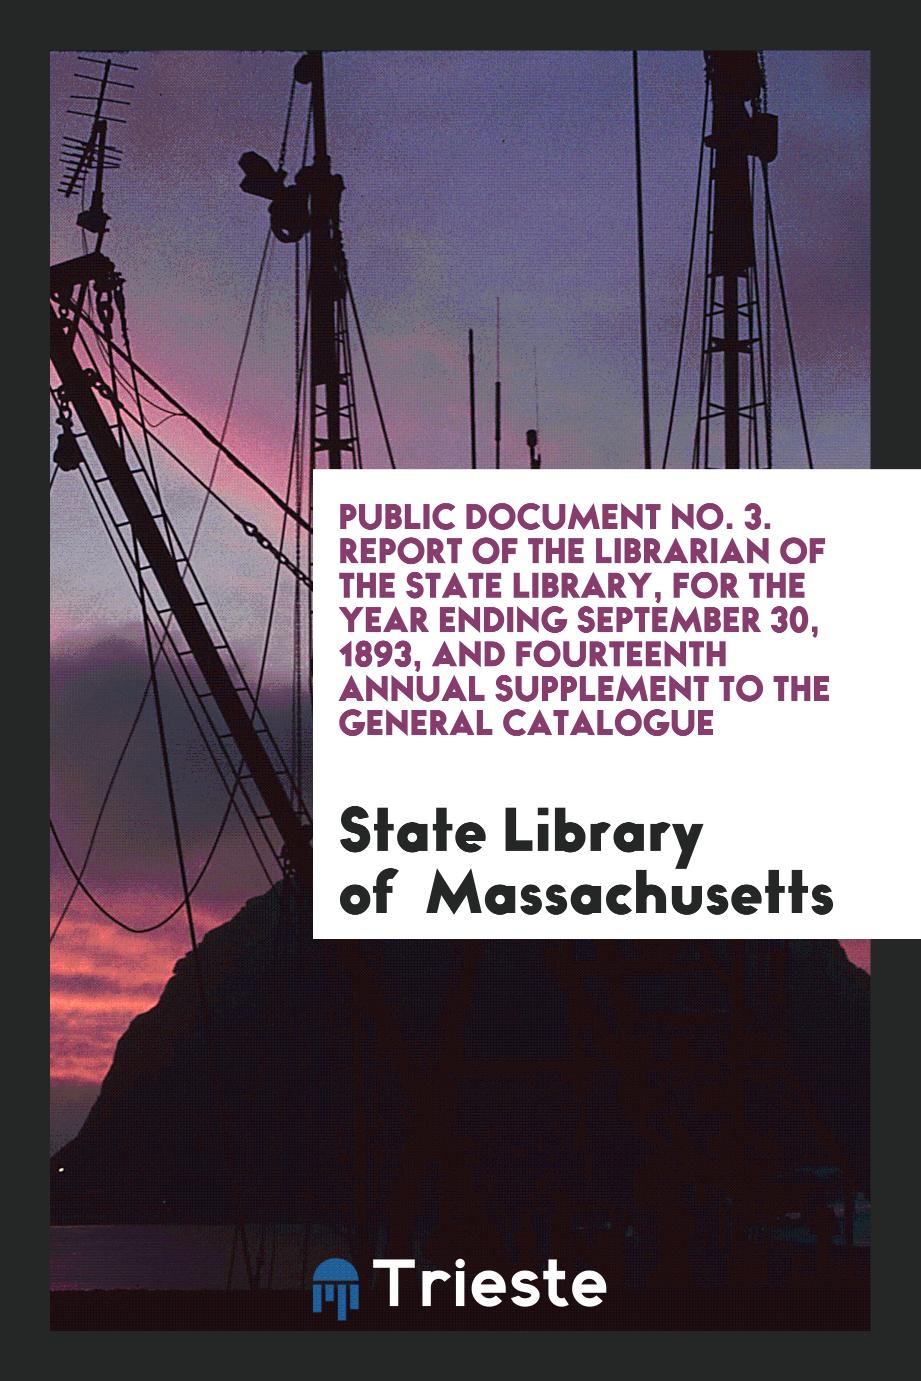 Public Document No. 3. Report of the Librarian of the State Library, for the Year Ending September 30, 1893, and Fourteenth Annual Supplement to the General Catalogue